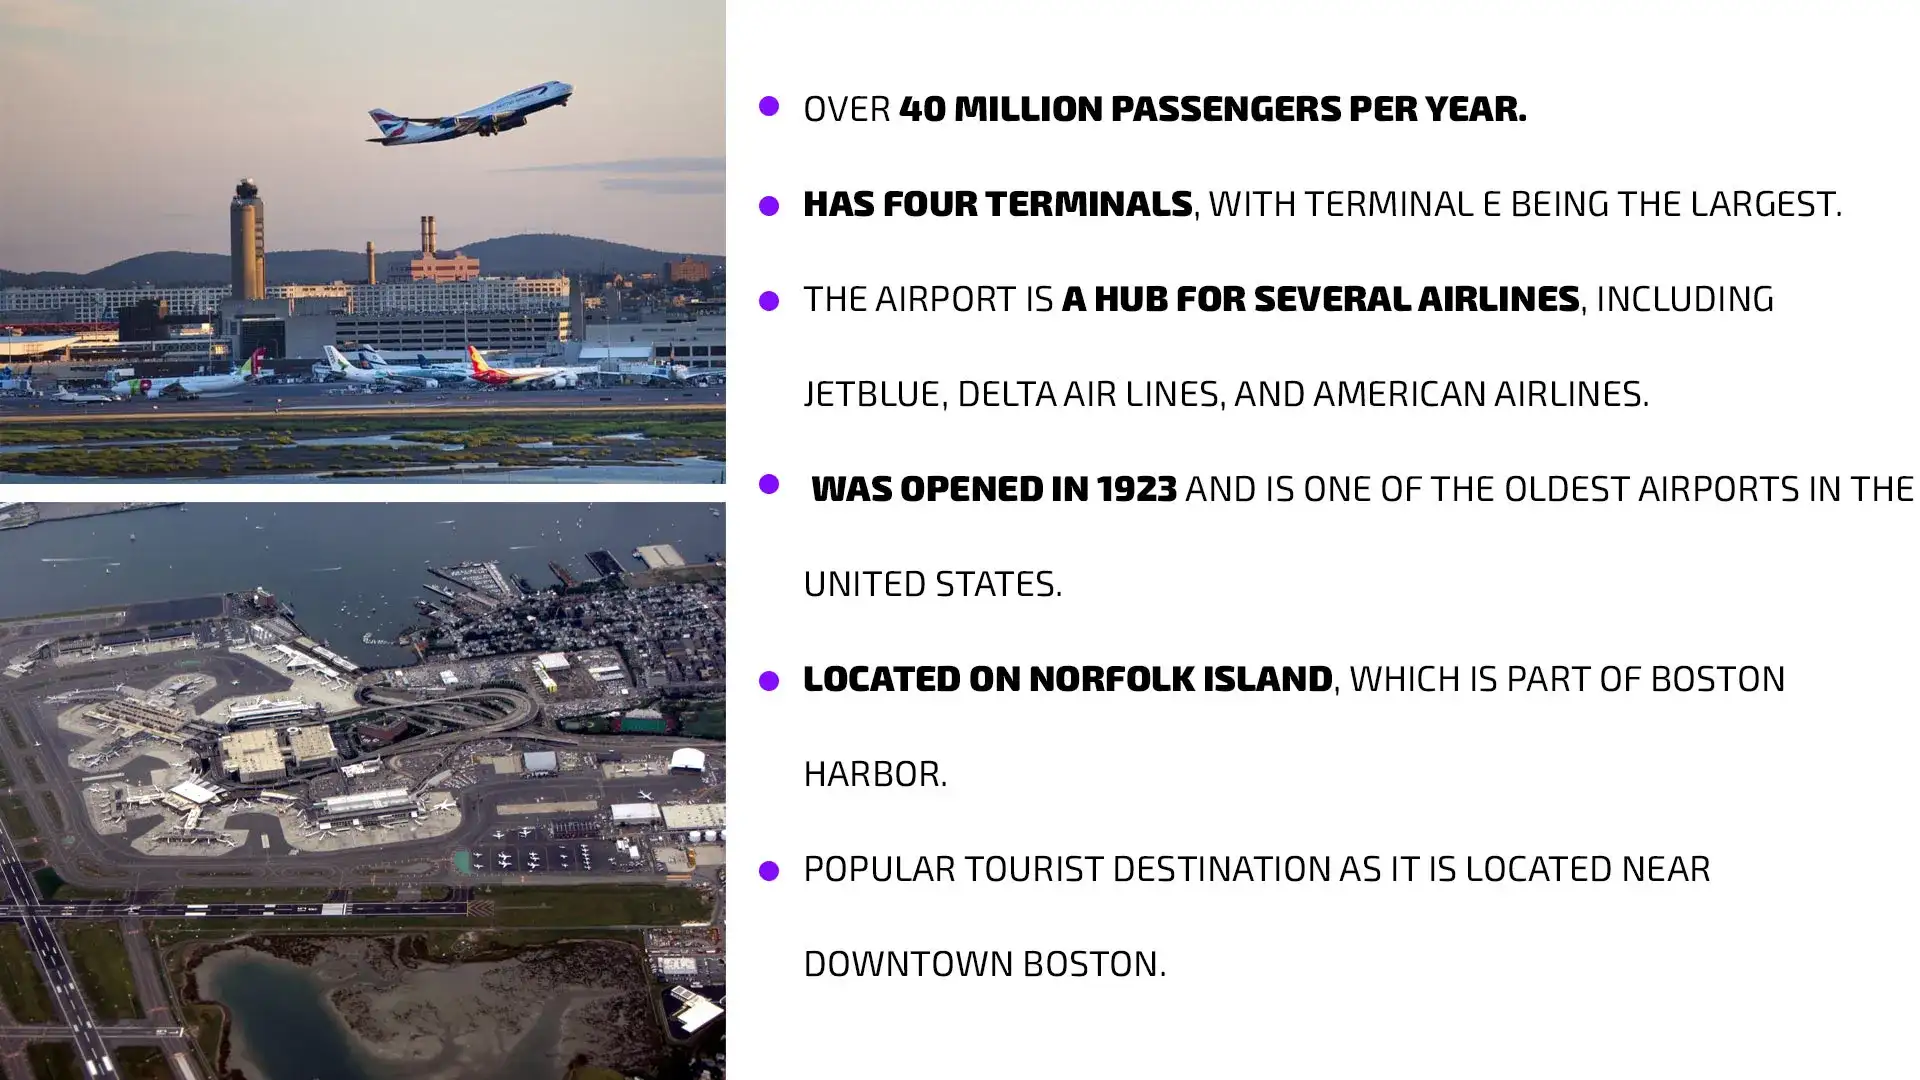 Interesting facts about BOS Airport